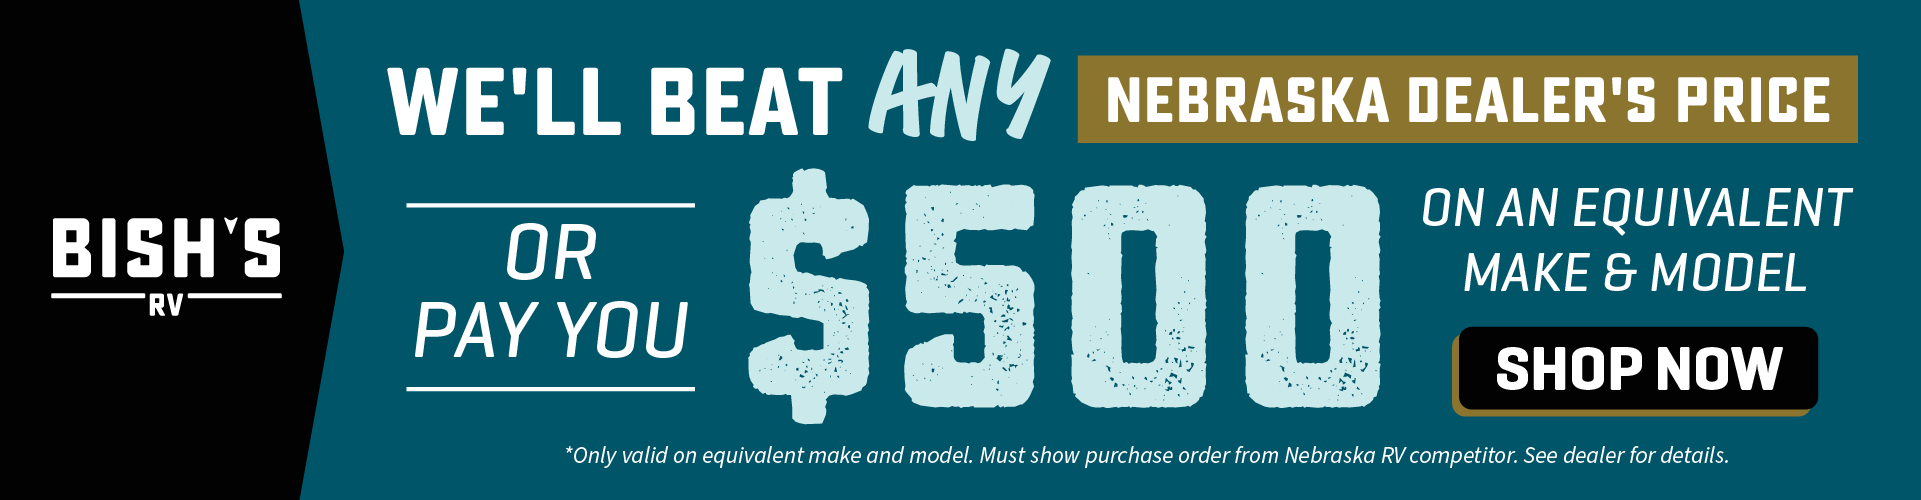 We'll Beat Any Nebraska Dealer's Price Or Pay You $500 On an Equivalent Make & Model - Bish's RV of Omaha - see details